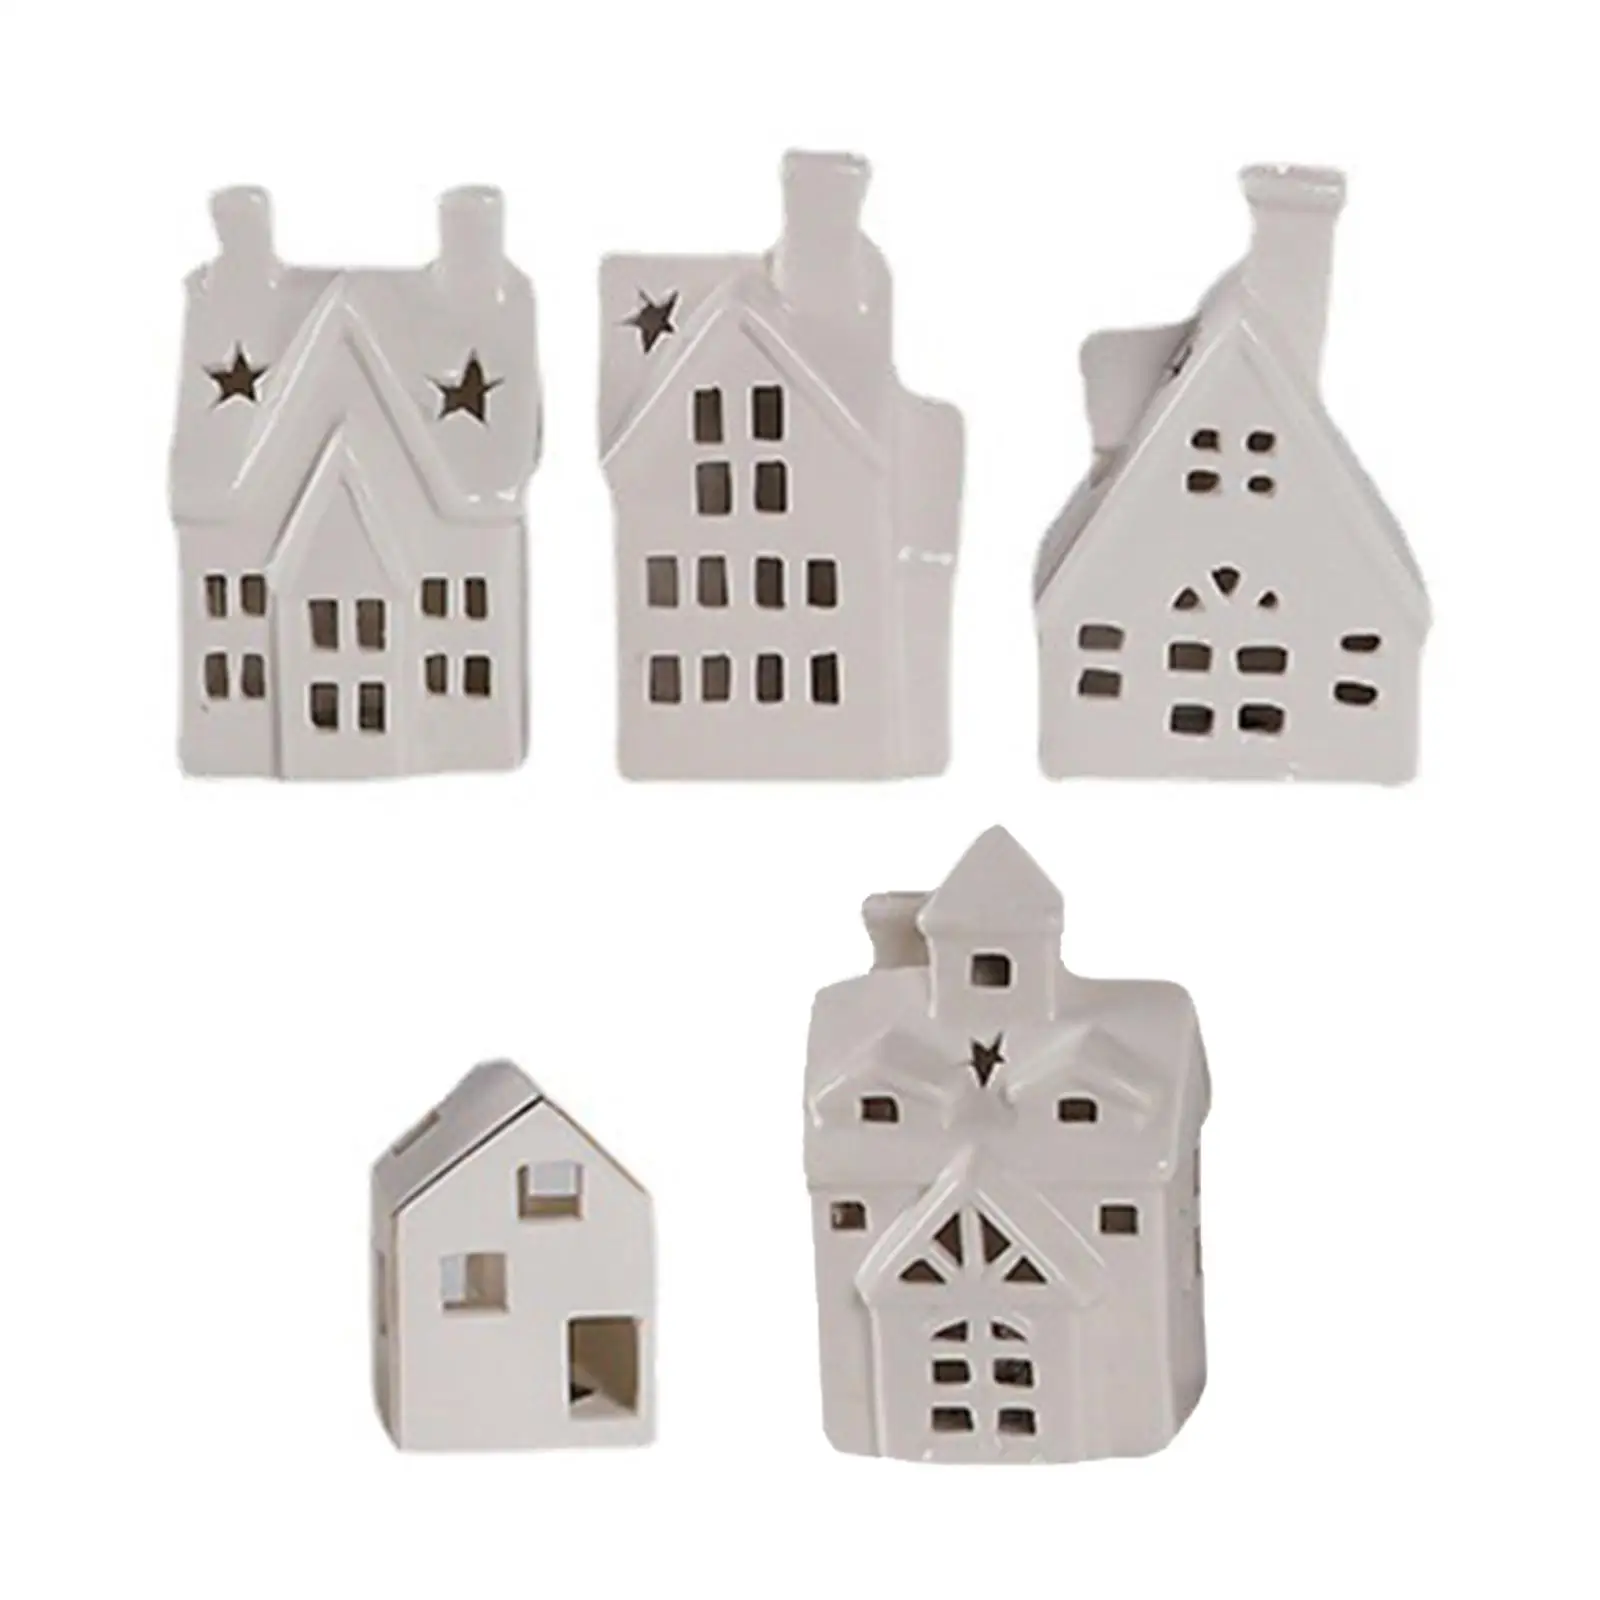 Ceramic Candle Holder Home Decor Small House Shaped Figurines Ornament Taper Candle Holder for Celebrations Party